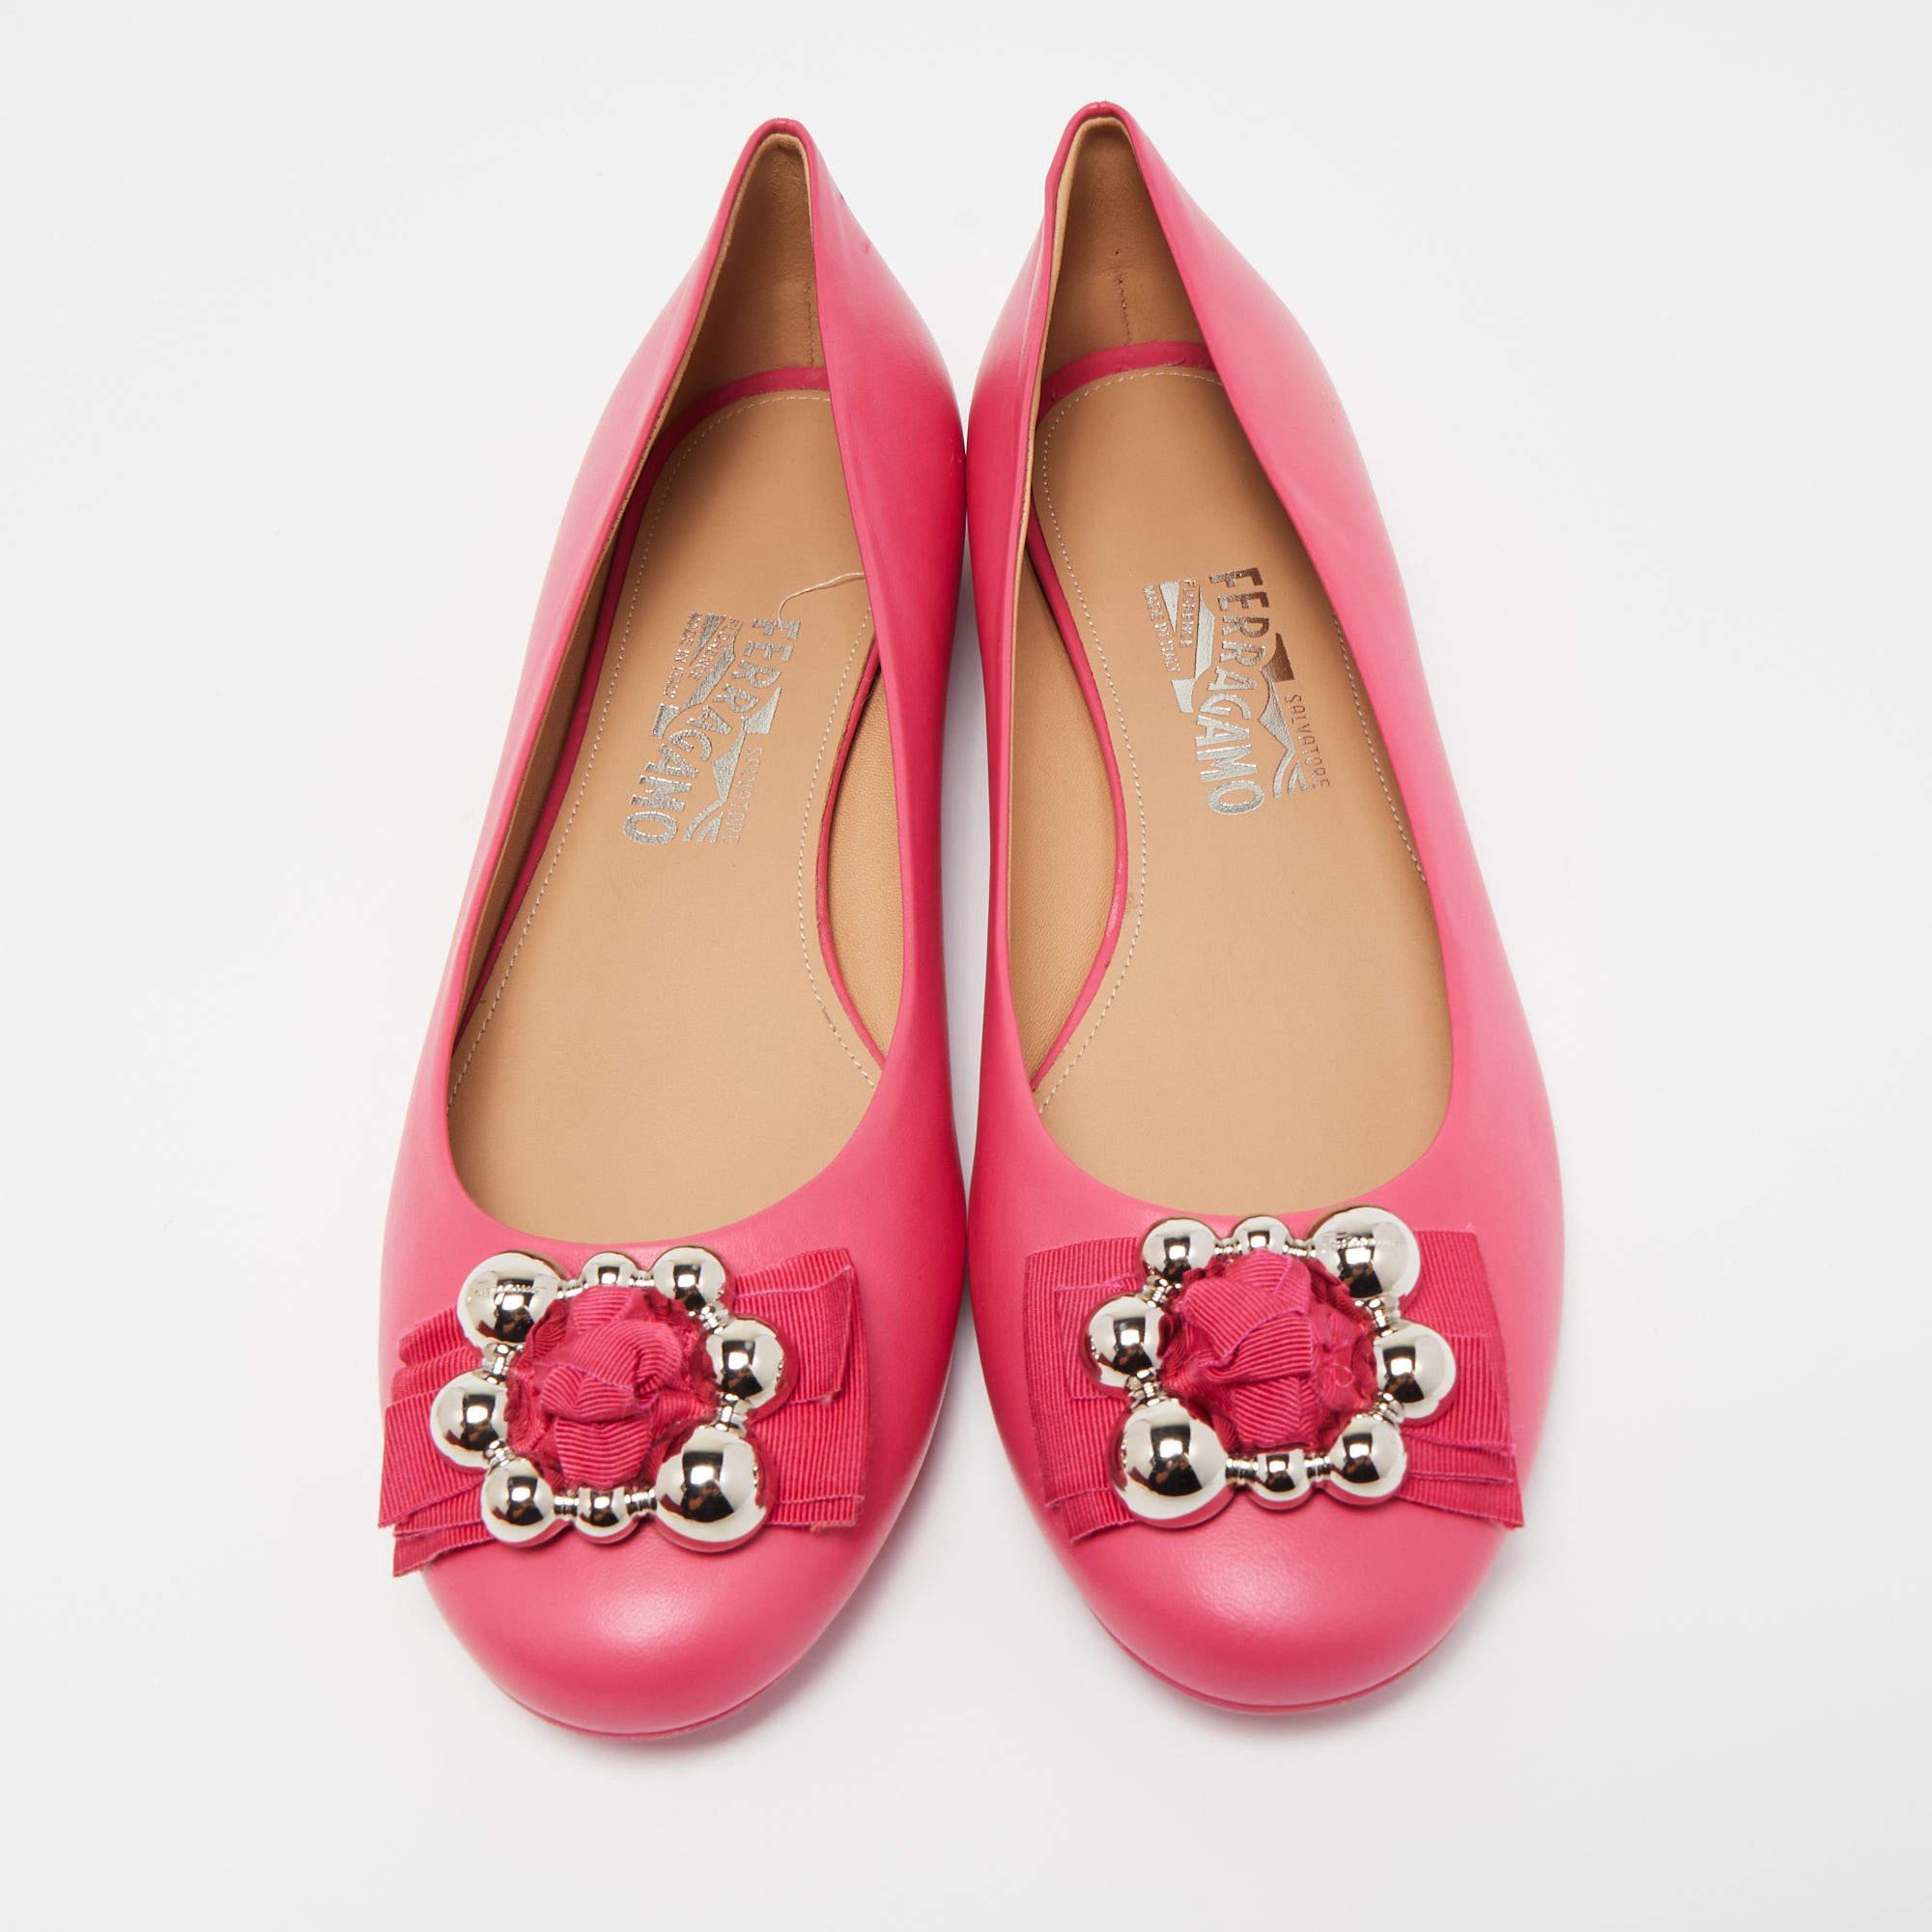 Complete your look by adding these Salvatore Ferragamo pink ballet flats to your collection of everyday footwear. They are crafted skilfully to grant the perfect fit and style.

